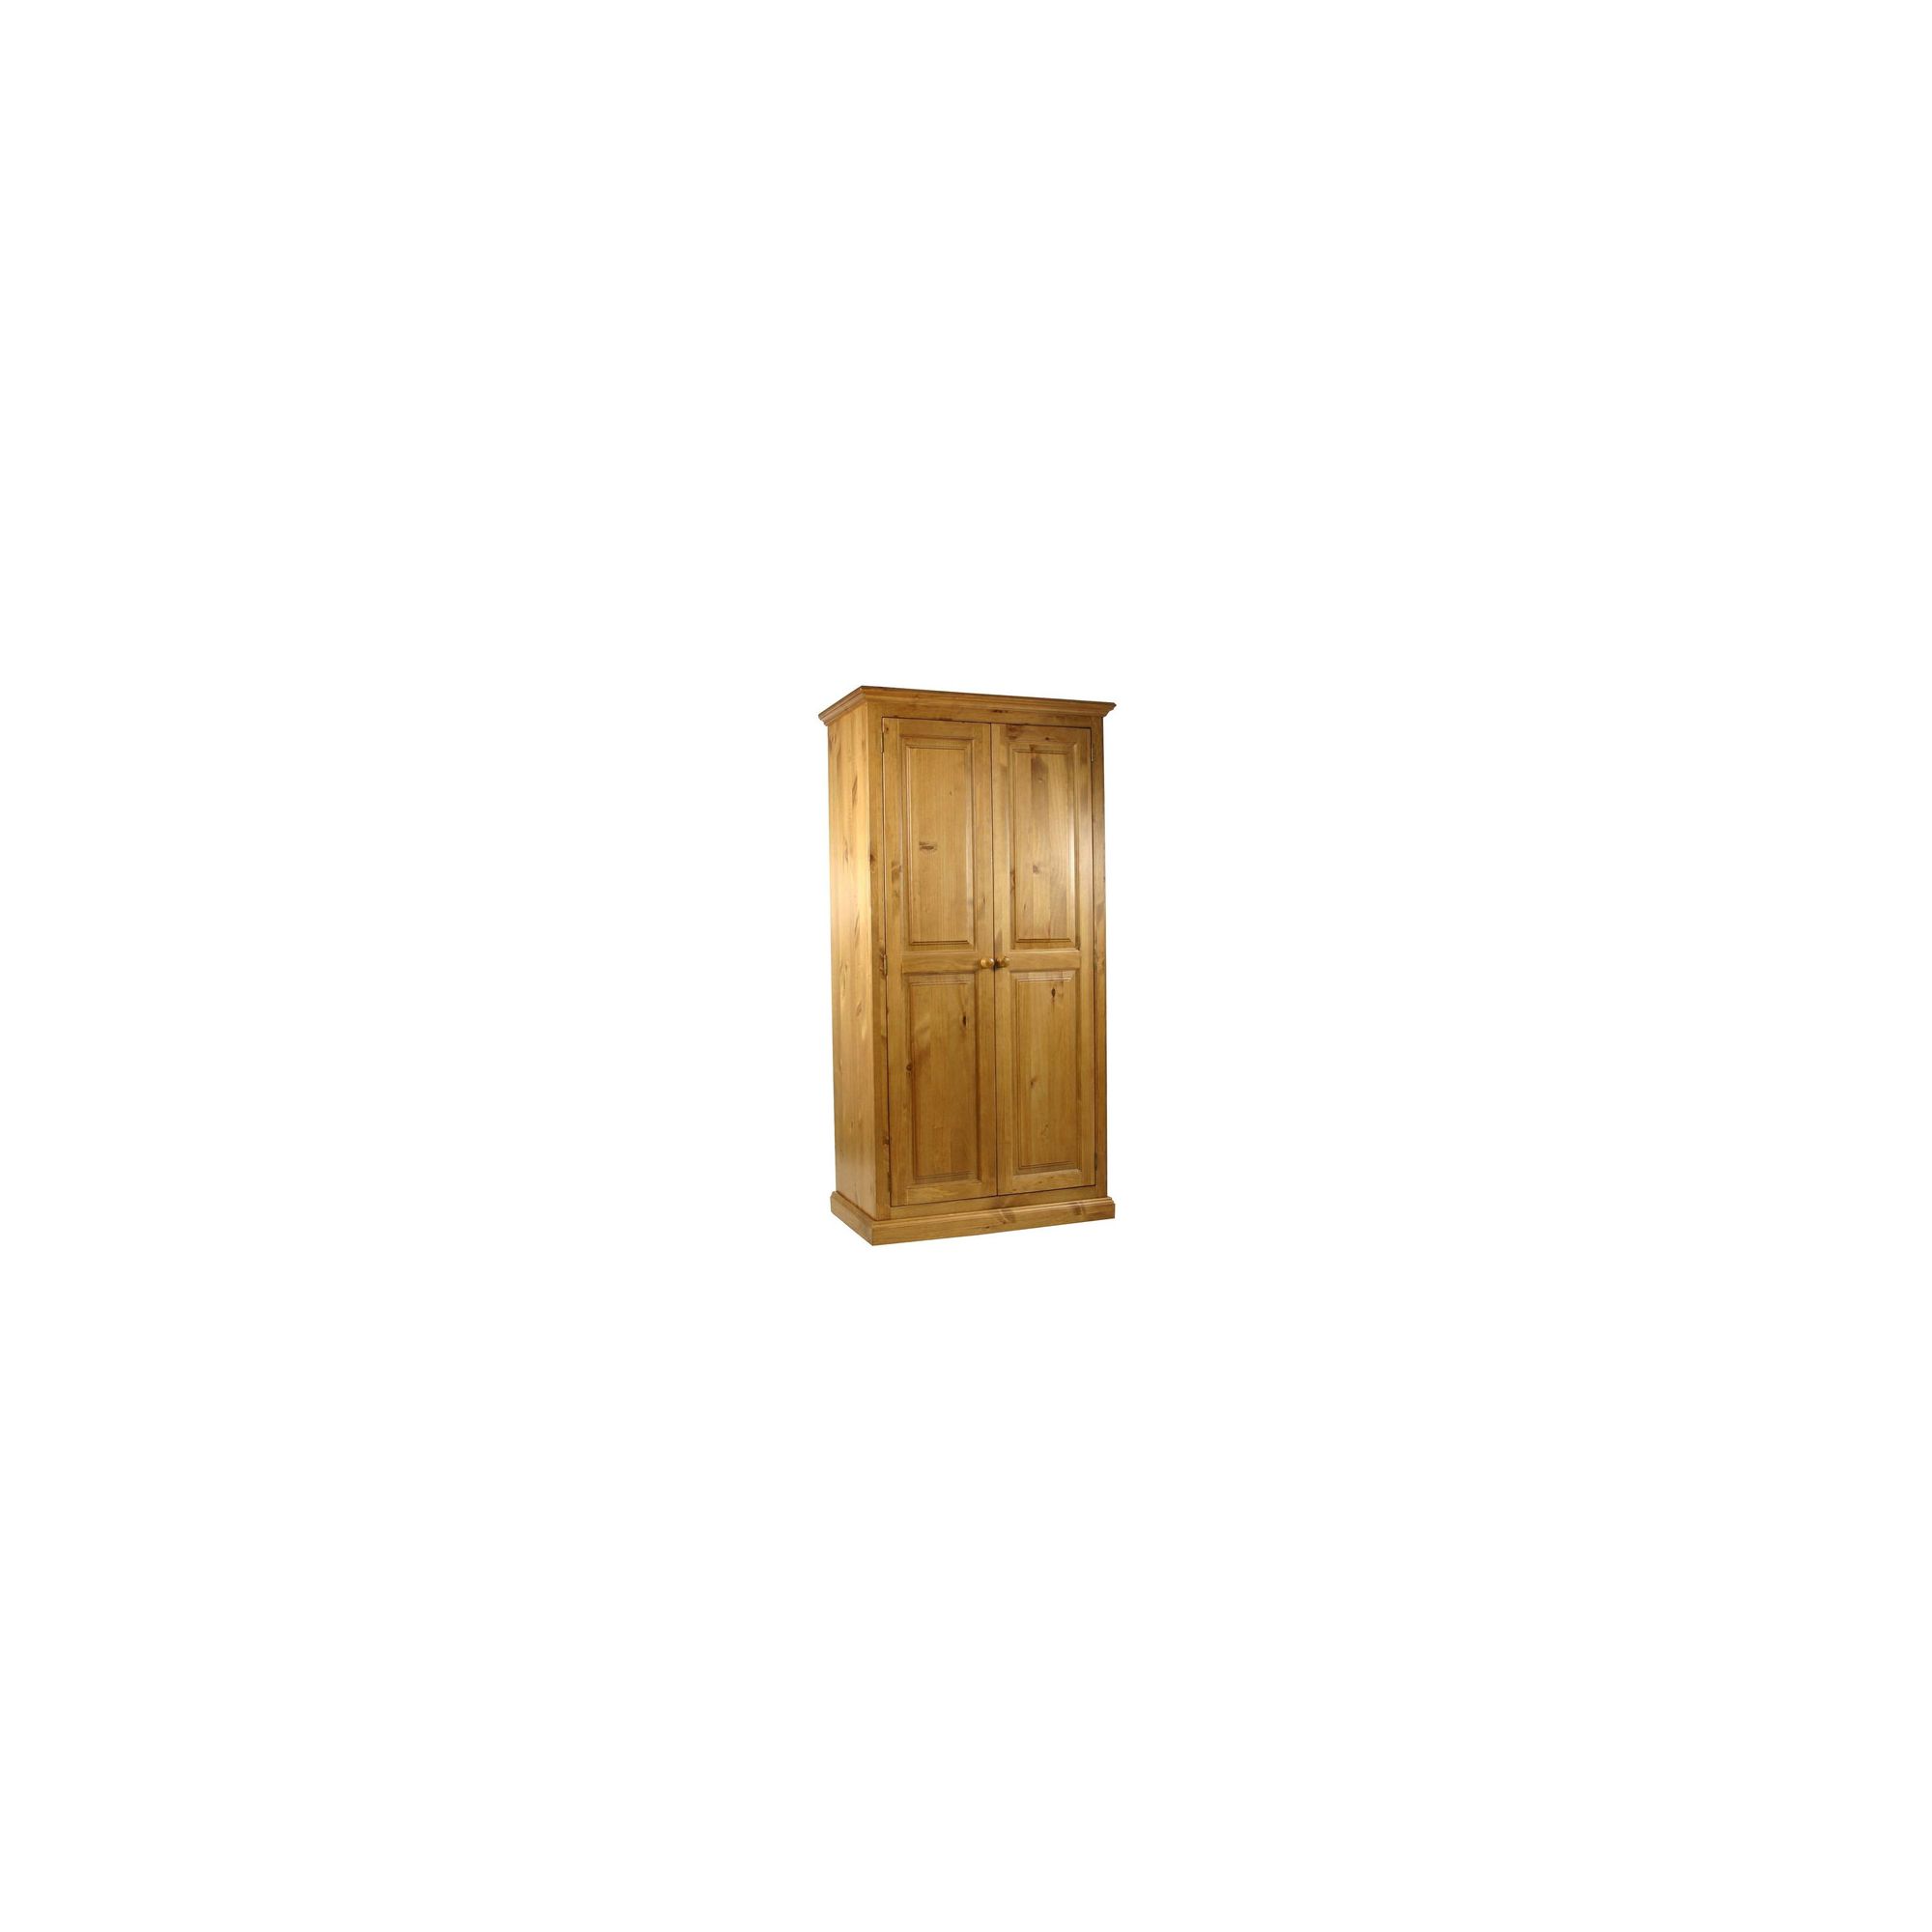 Kelburn Furniture Pine Full Hanging Small Wardrobe in Antique Wax Lacquer at Tesco Direct